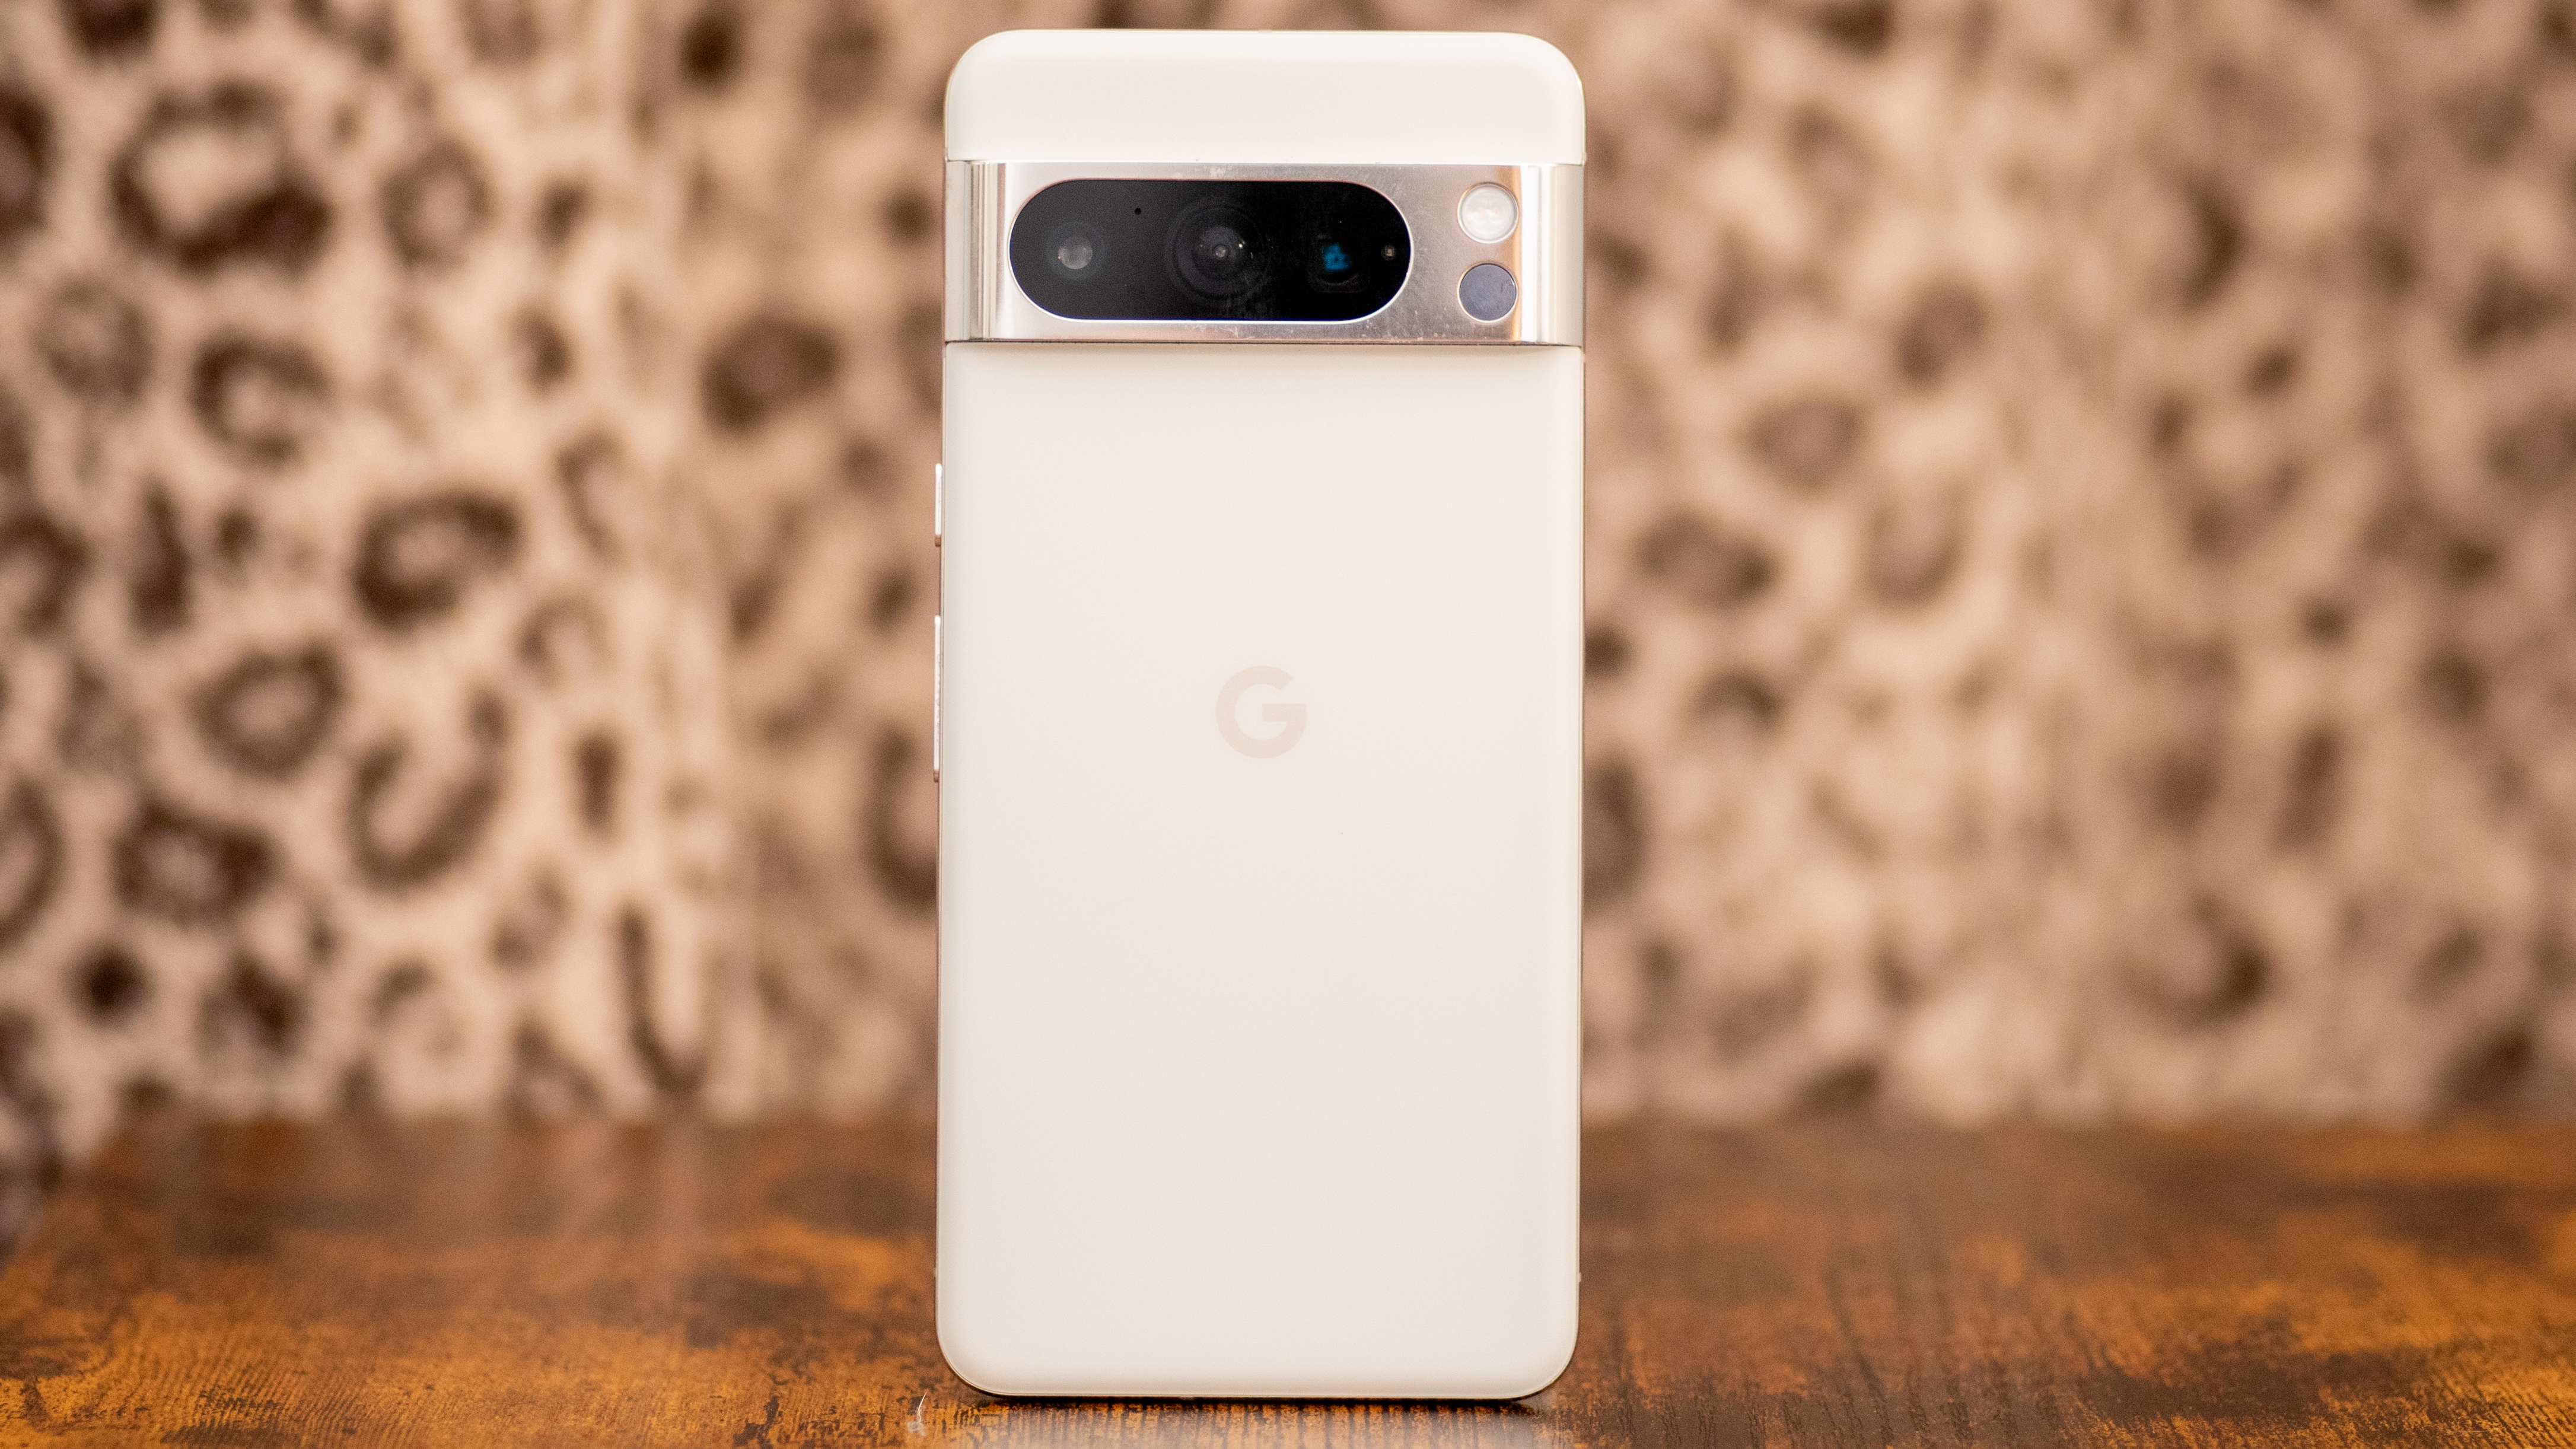 Google Pixel 8 Pro reduction in porcelain in front of animal print